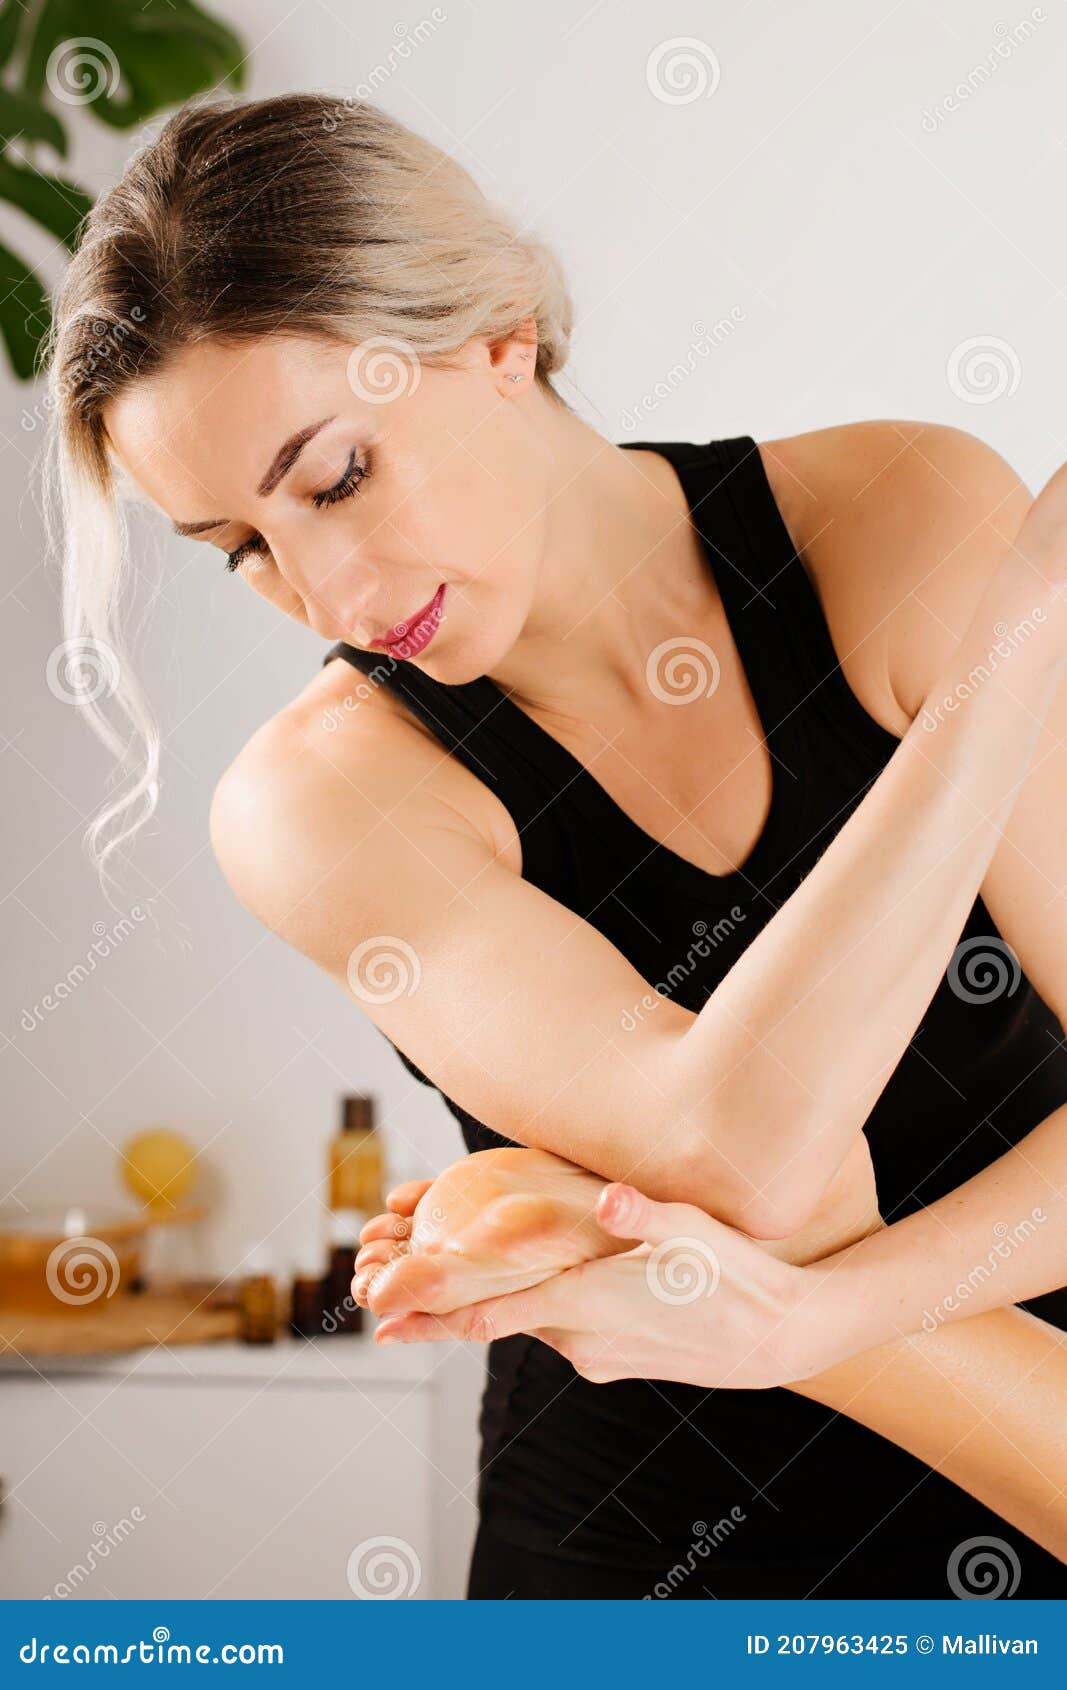 Lomi Lomi for Feet and Legs Stock Image - Image of female, lying: 207963425